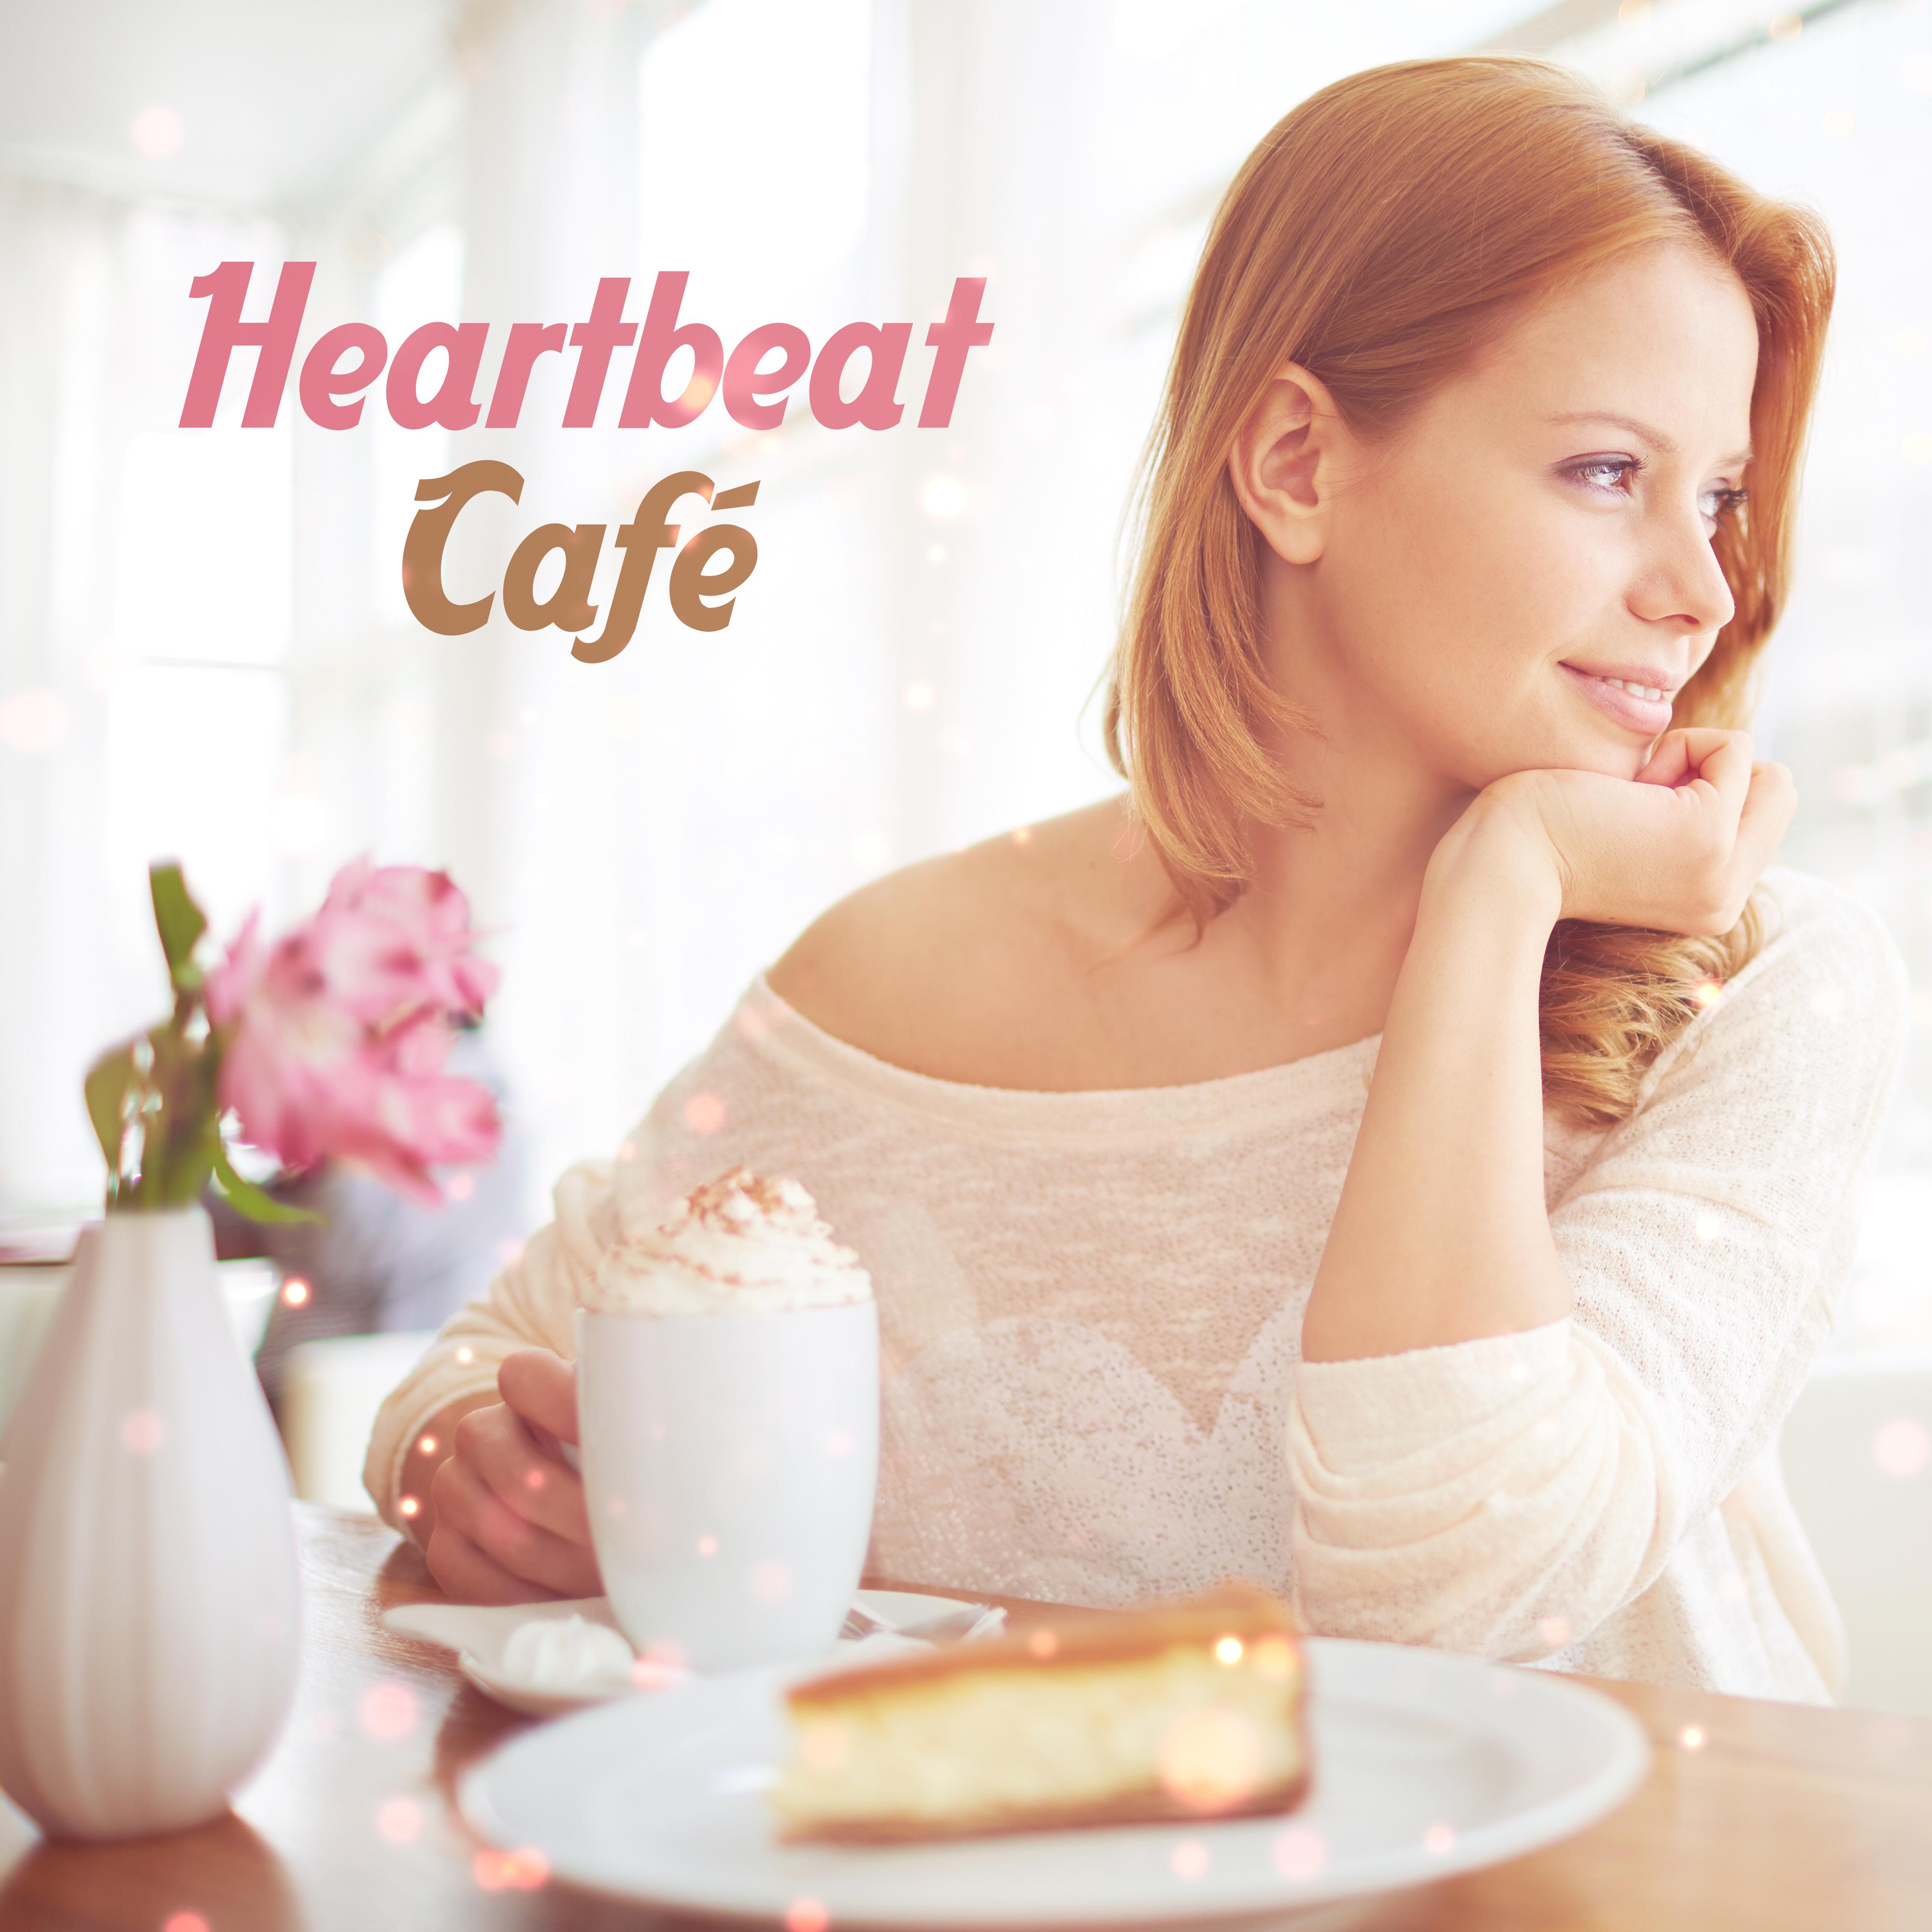 Heartbeat Cafe  Smooth Jazz, Lounge, Cafe Music, Coffee Time, Soothing Jazz Vibrations